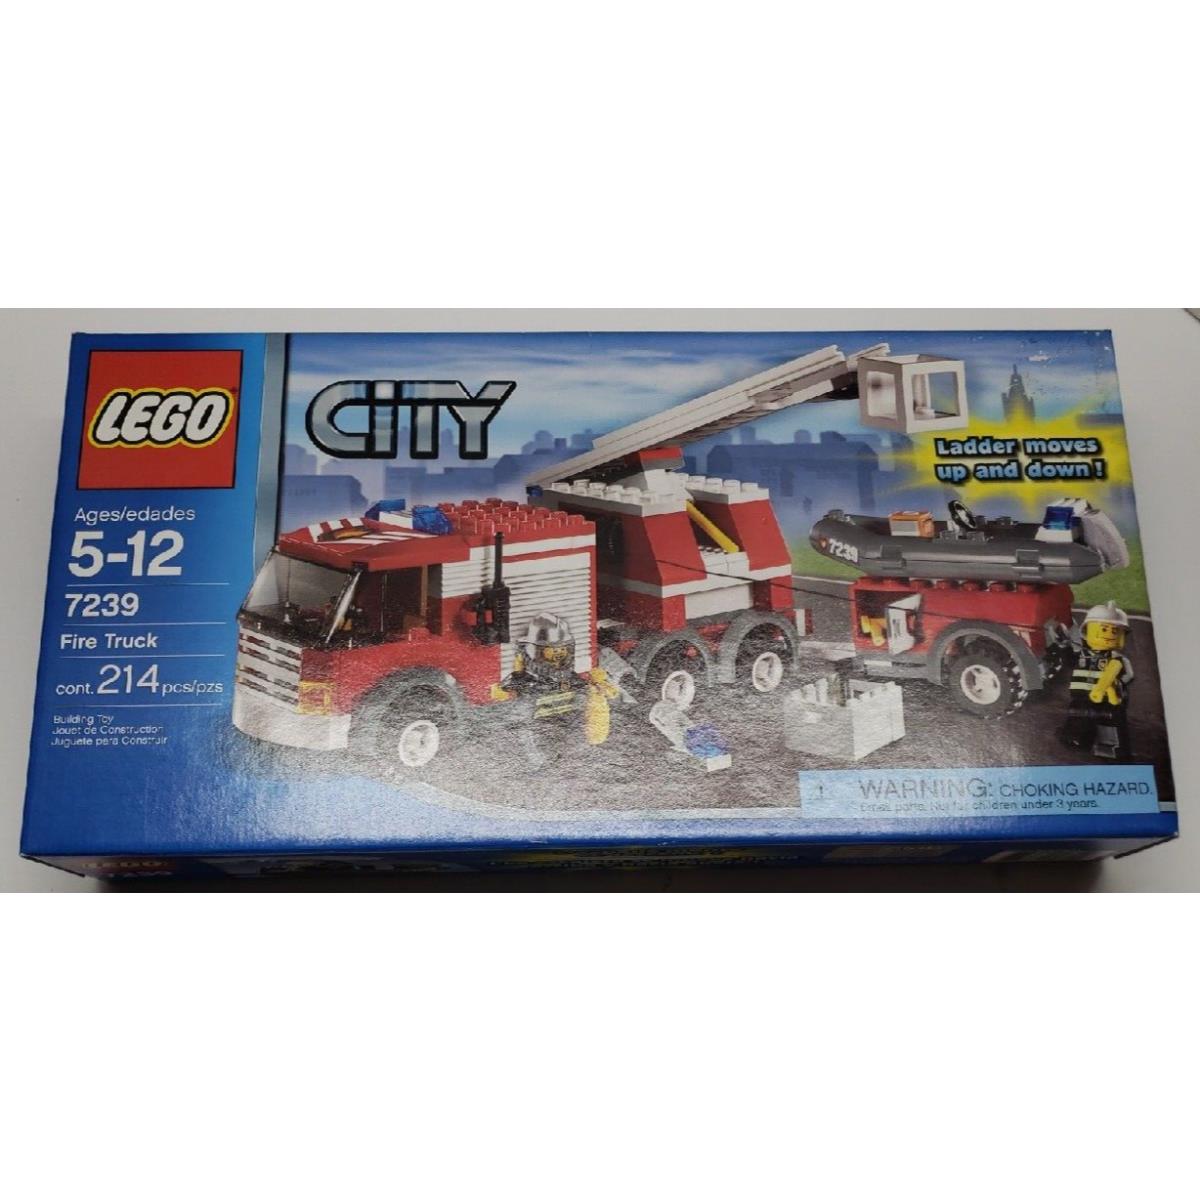 Lego City: Fire Truck Set 7239 214 Pieces Includes 2 Firefighter Minifigures